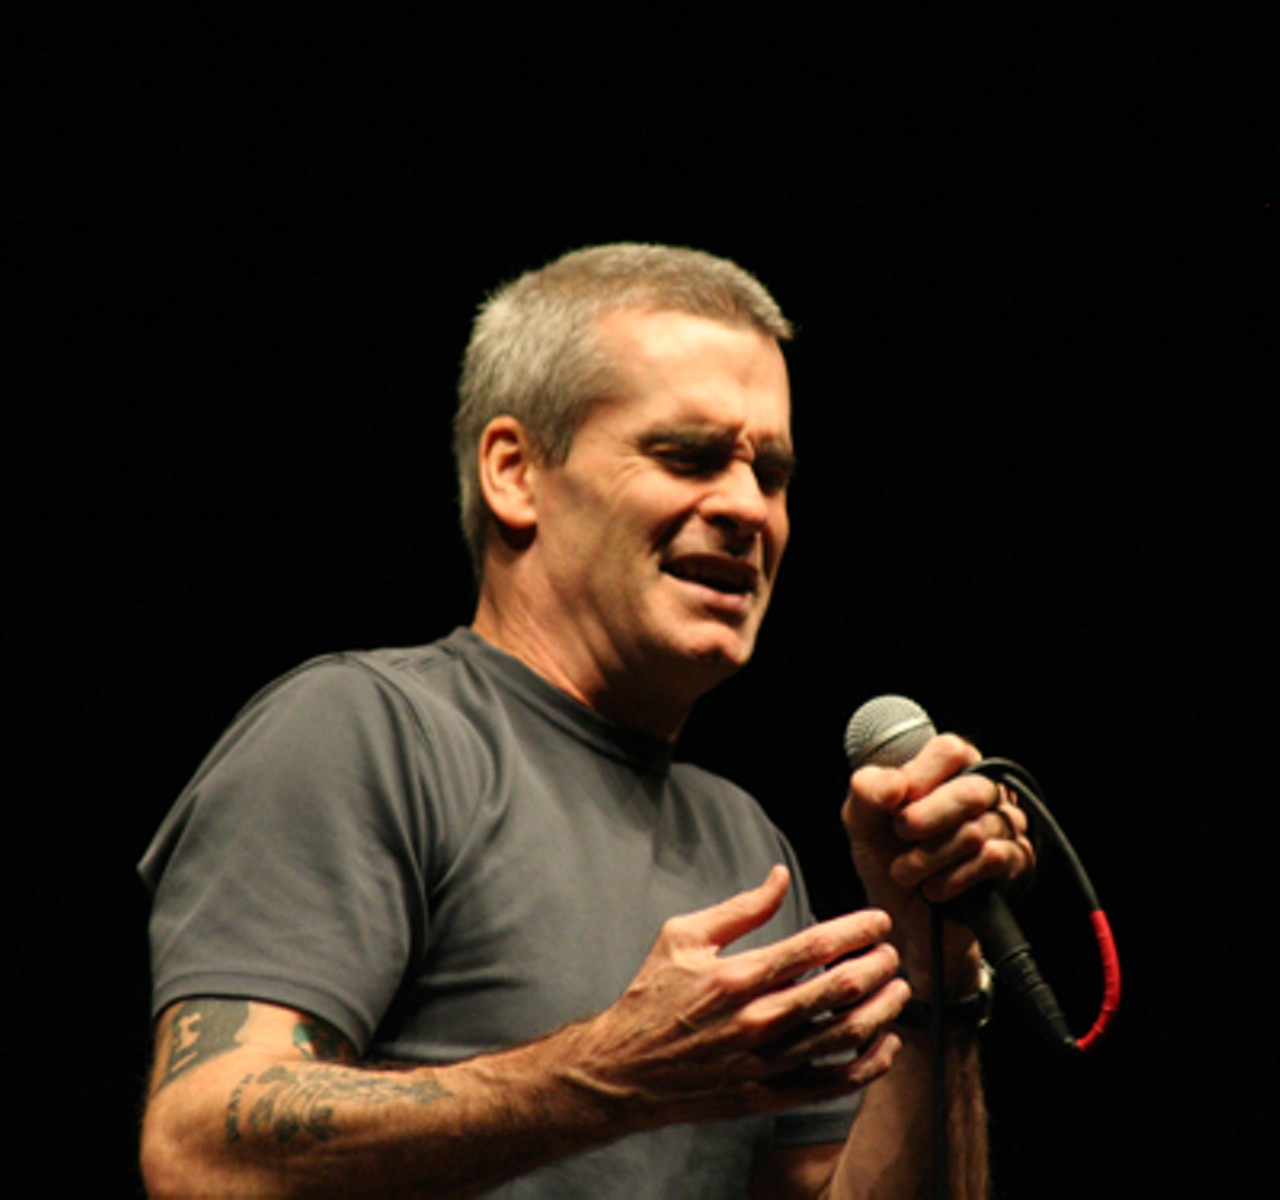 Anal retentive Rollins. 
Read a recap of Rollins' spoken word performance in A to Z.
Read an interview with Rollins in this week's edition, "Get in the Van: Henry Rollins &mdash; musician, spoken-word artist, writer and punk legend &mdash; talks about life on the road.". 
We also posted outtakes from that interview in A to Z.